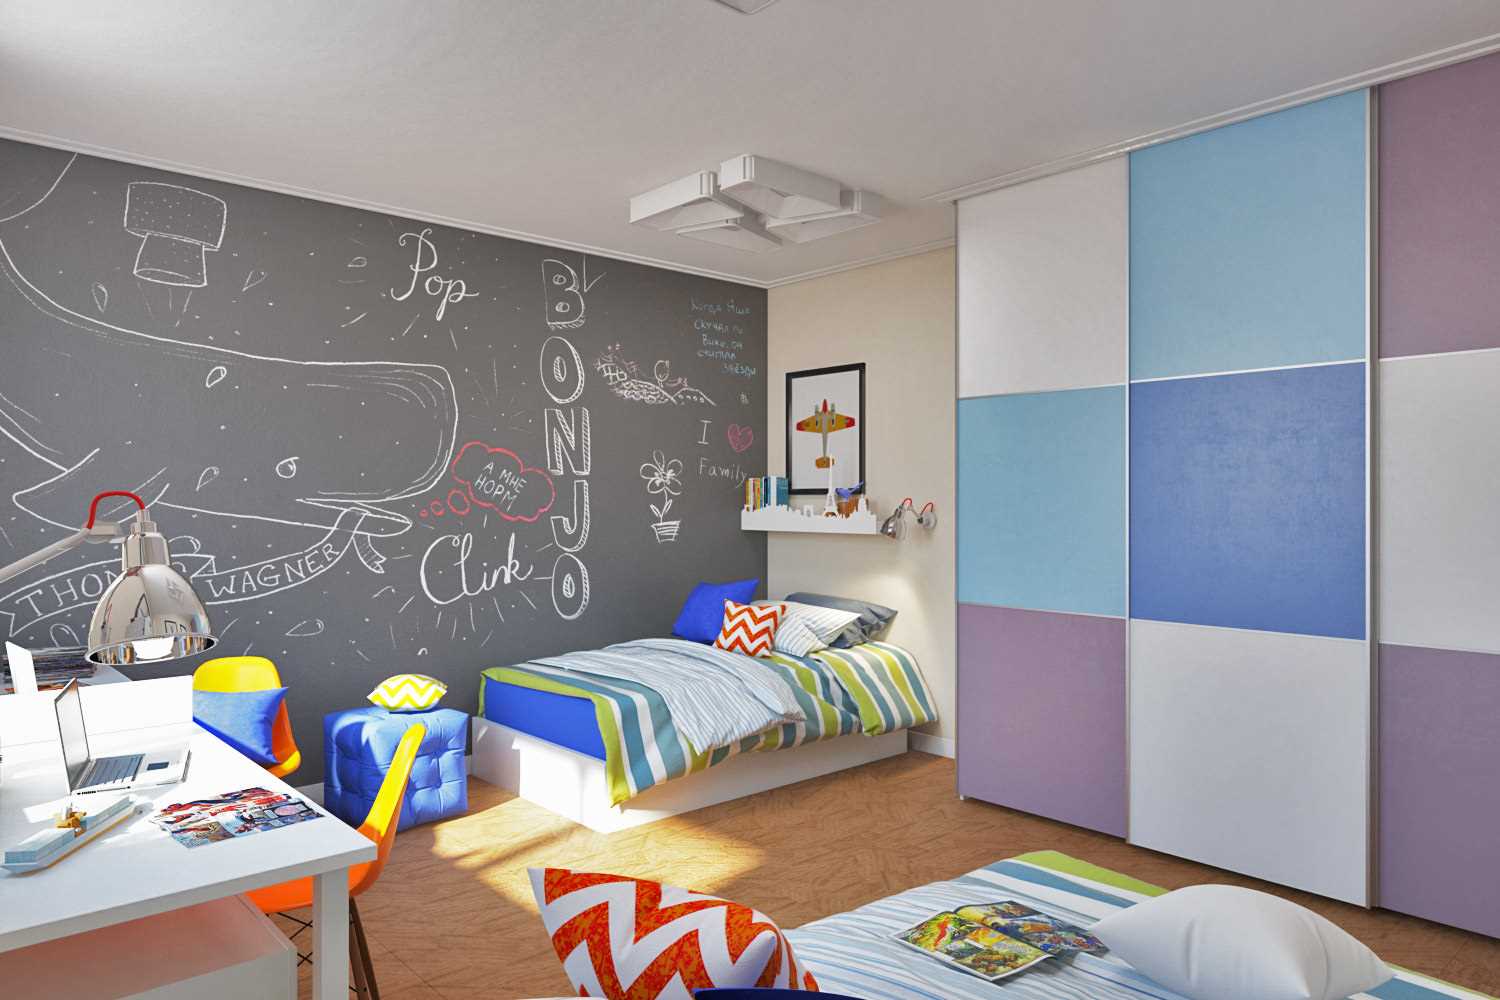 an example of an unusual modern decor for children